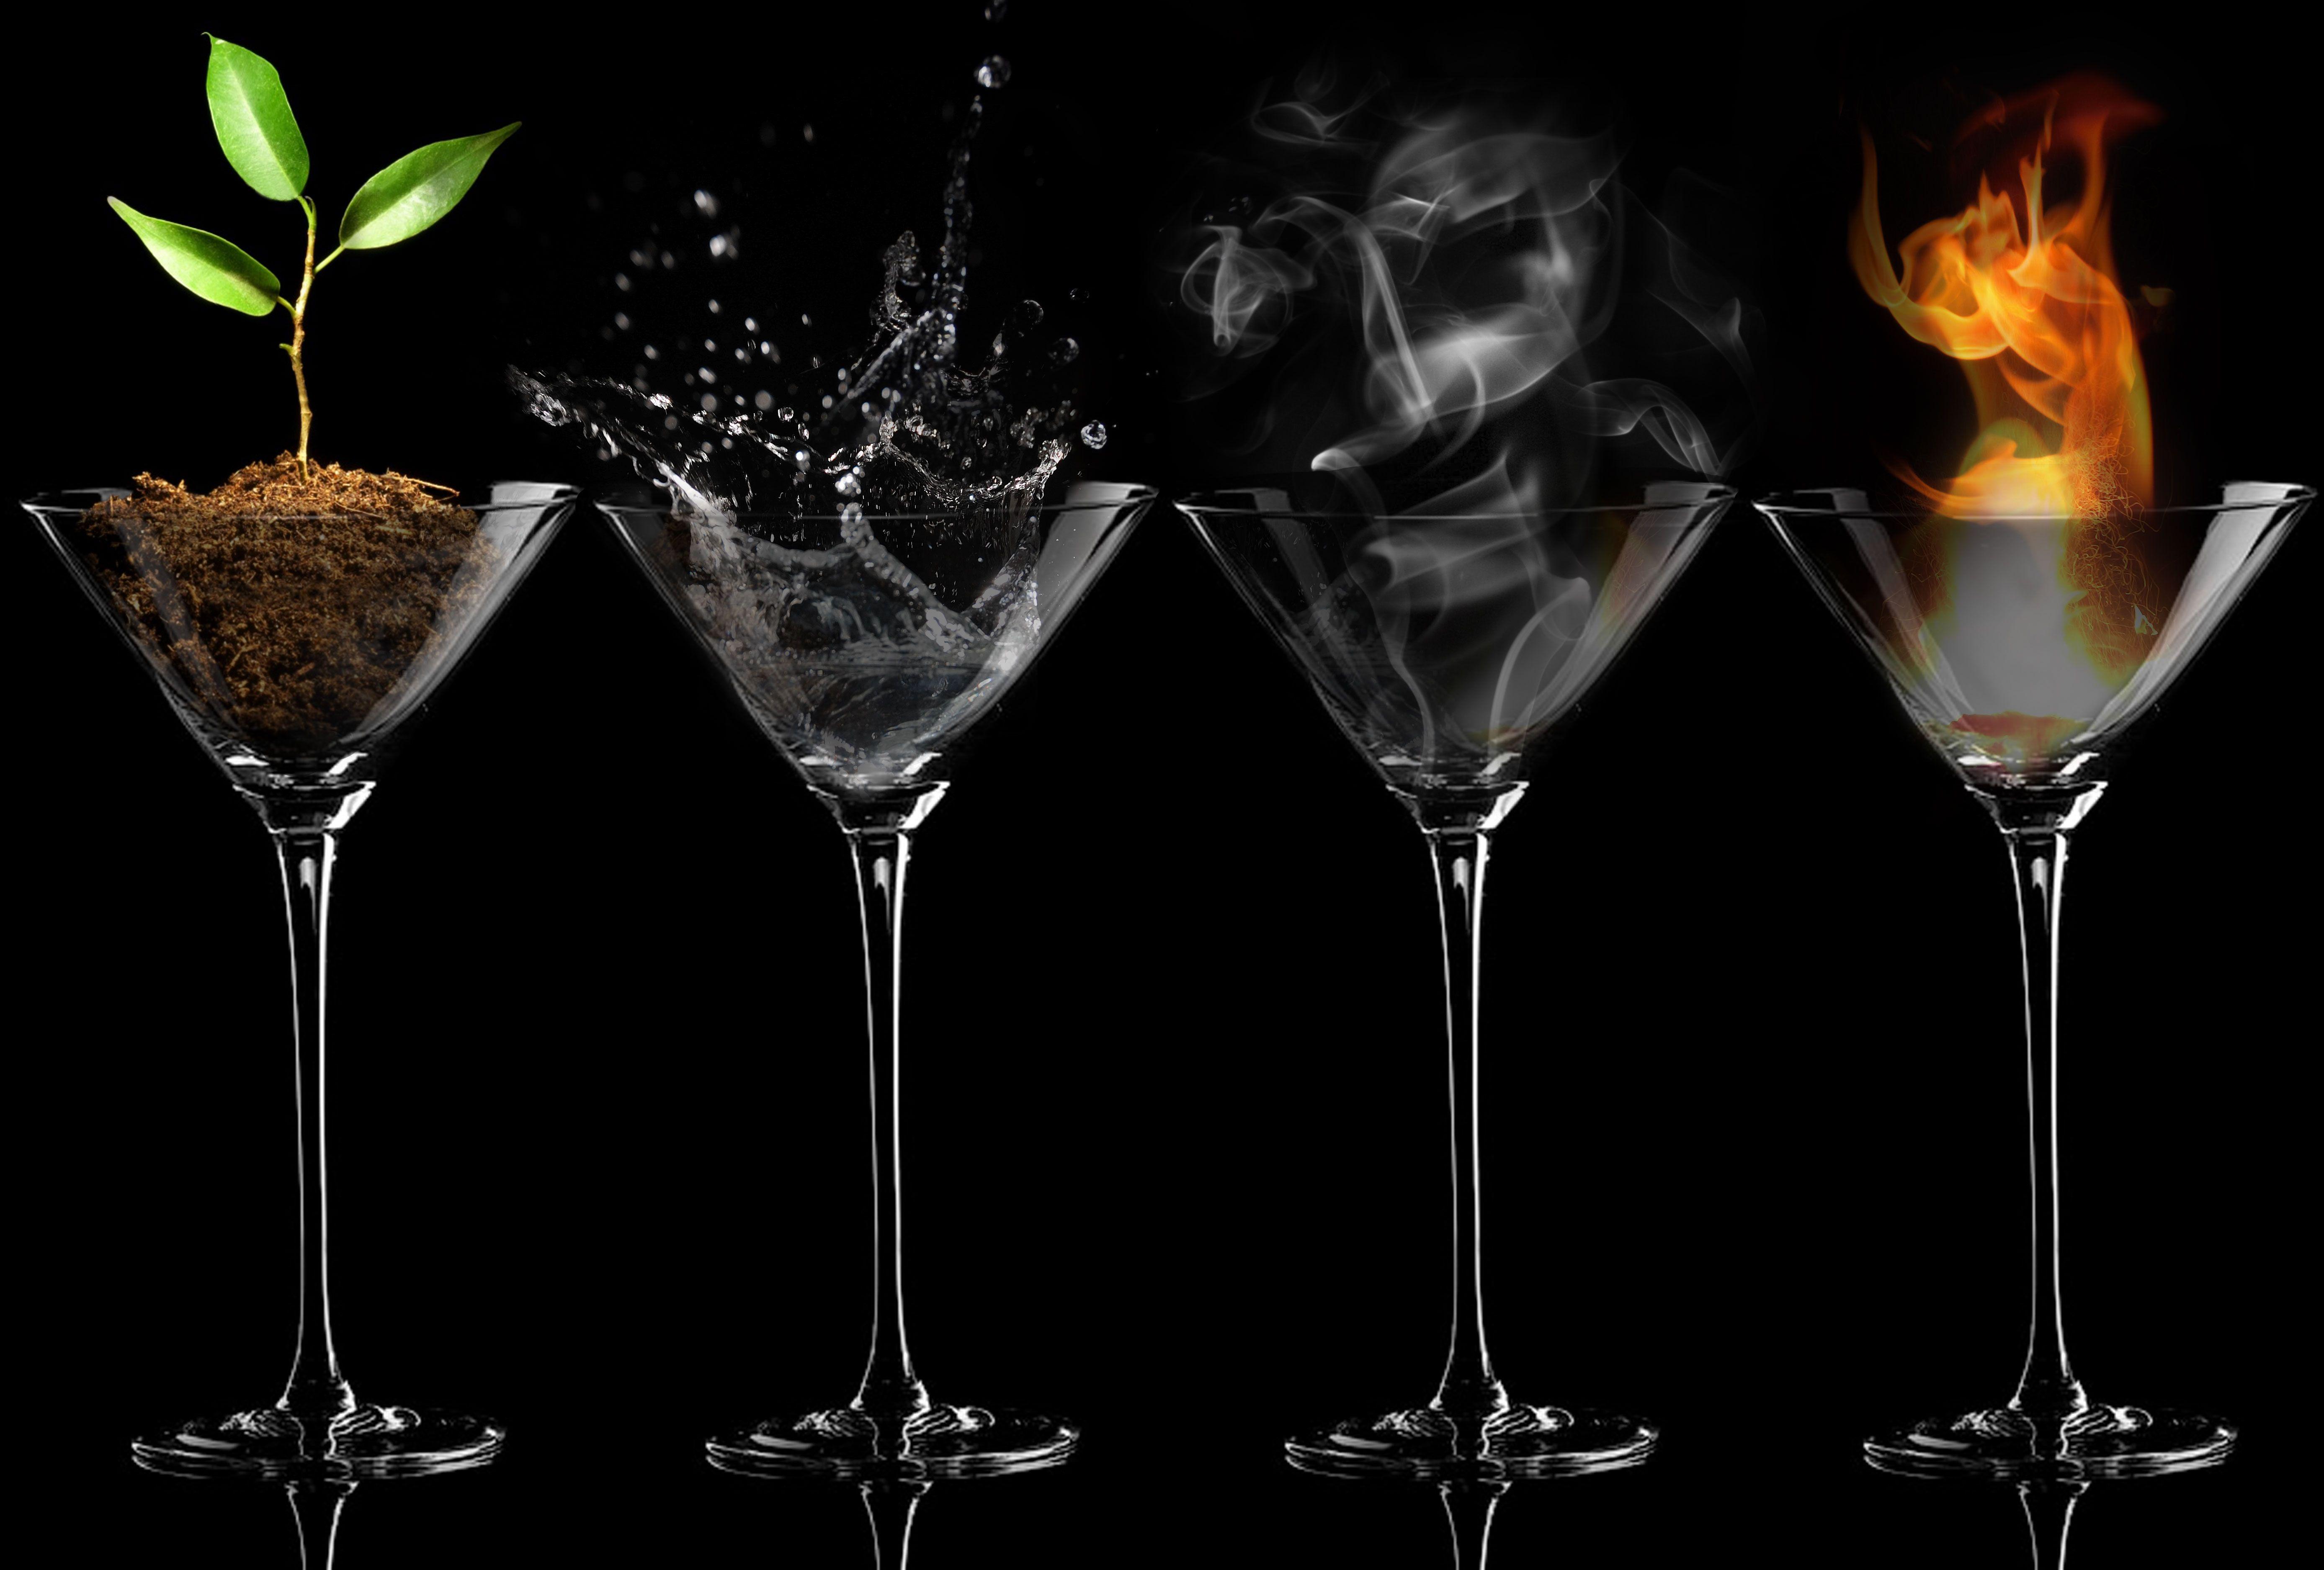 Awesome Earth Water Fire Air Elements Wallpaper. Elements